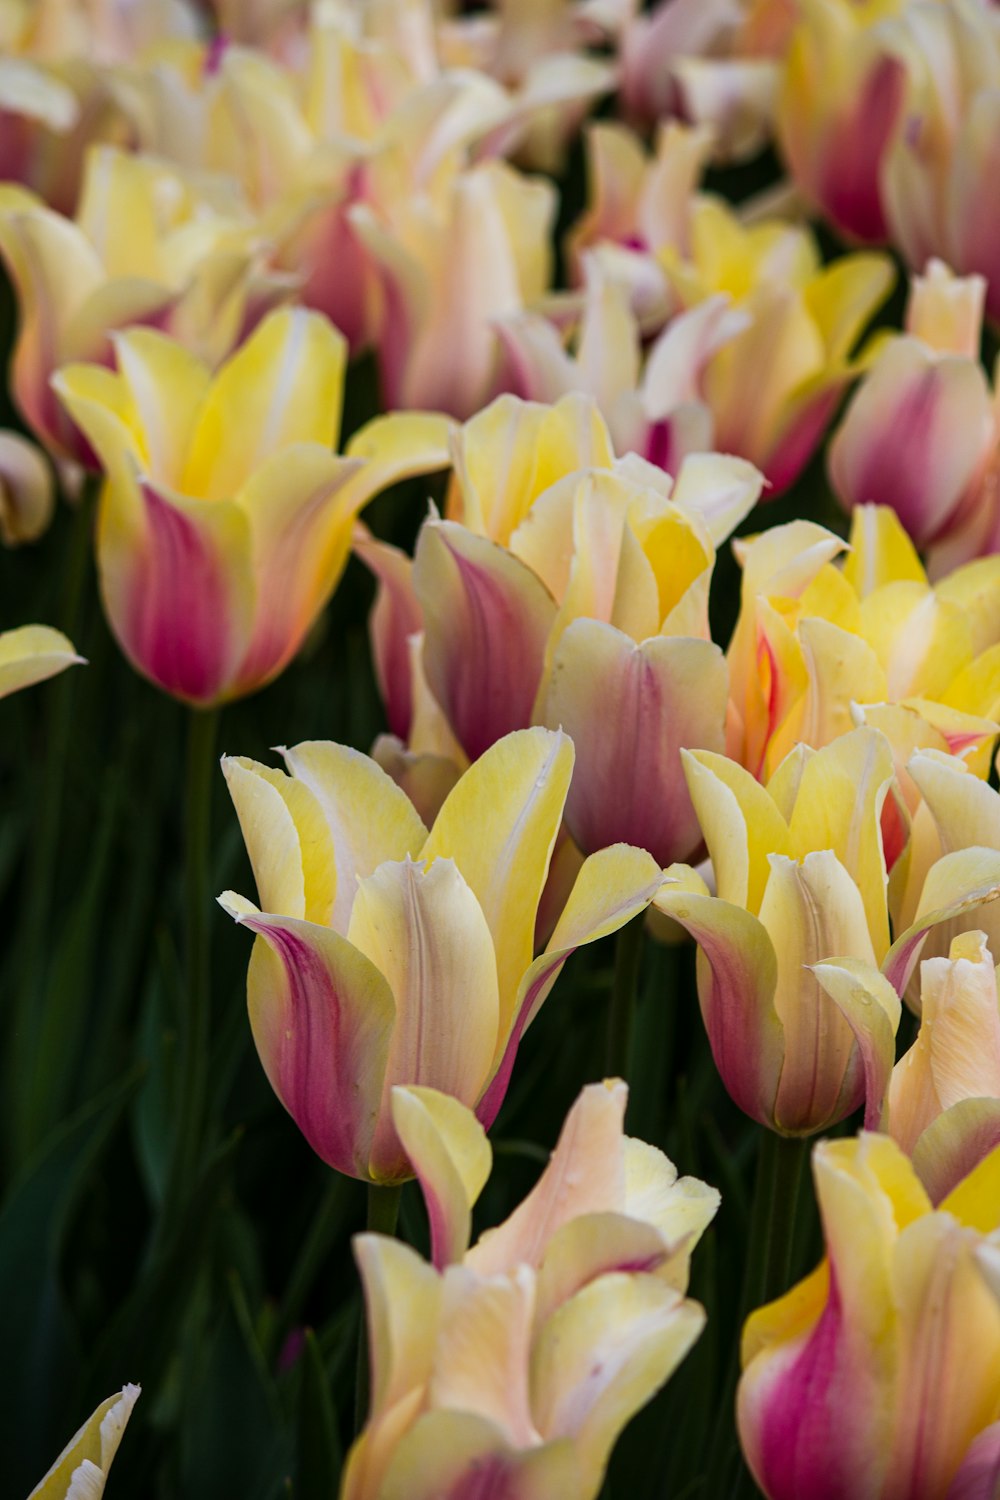 pink and yellow tulips in bloom during daytime